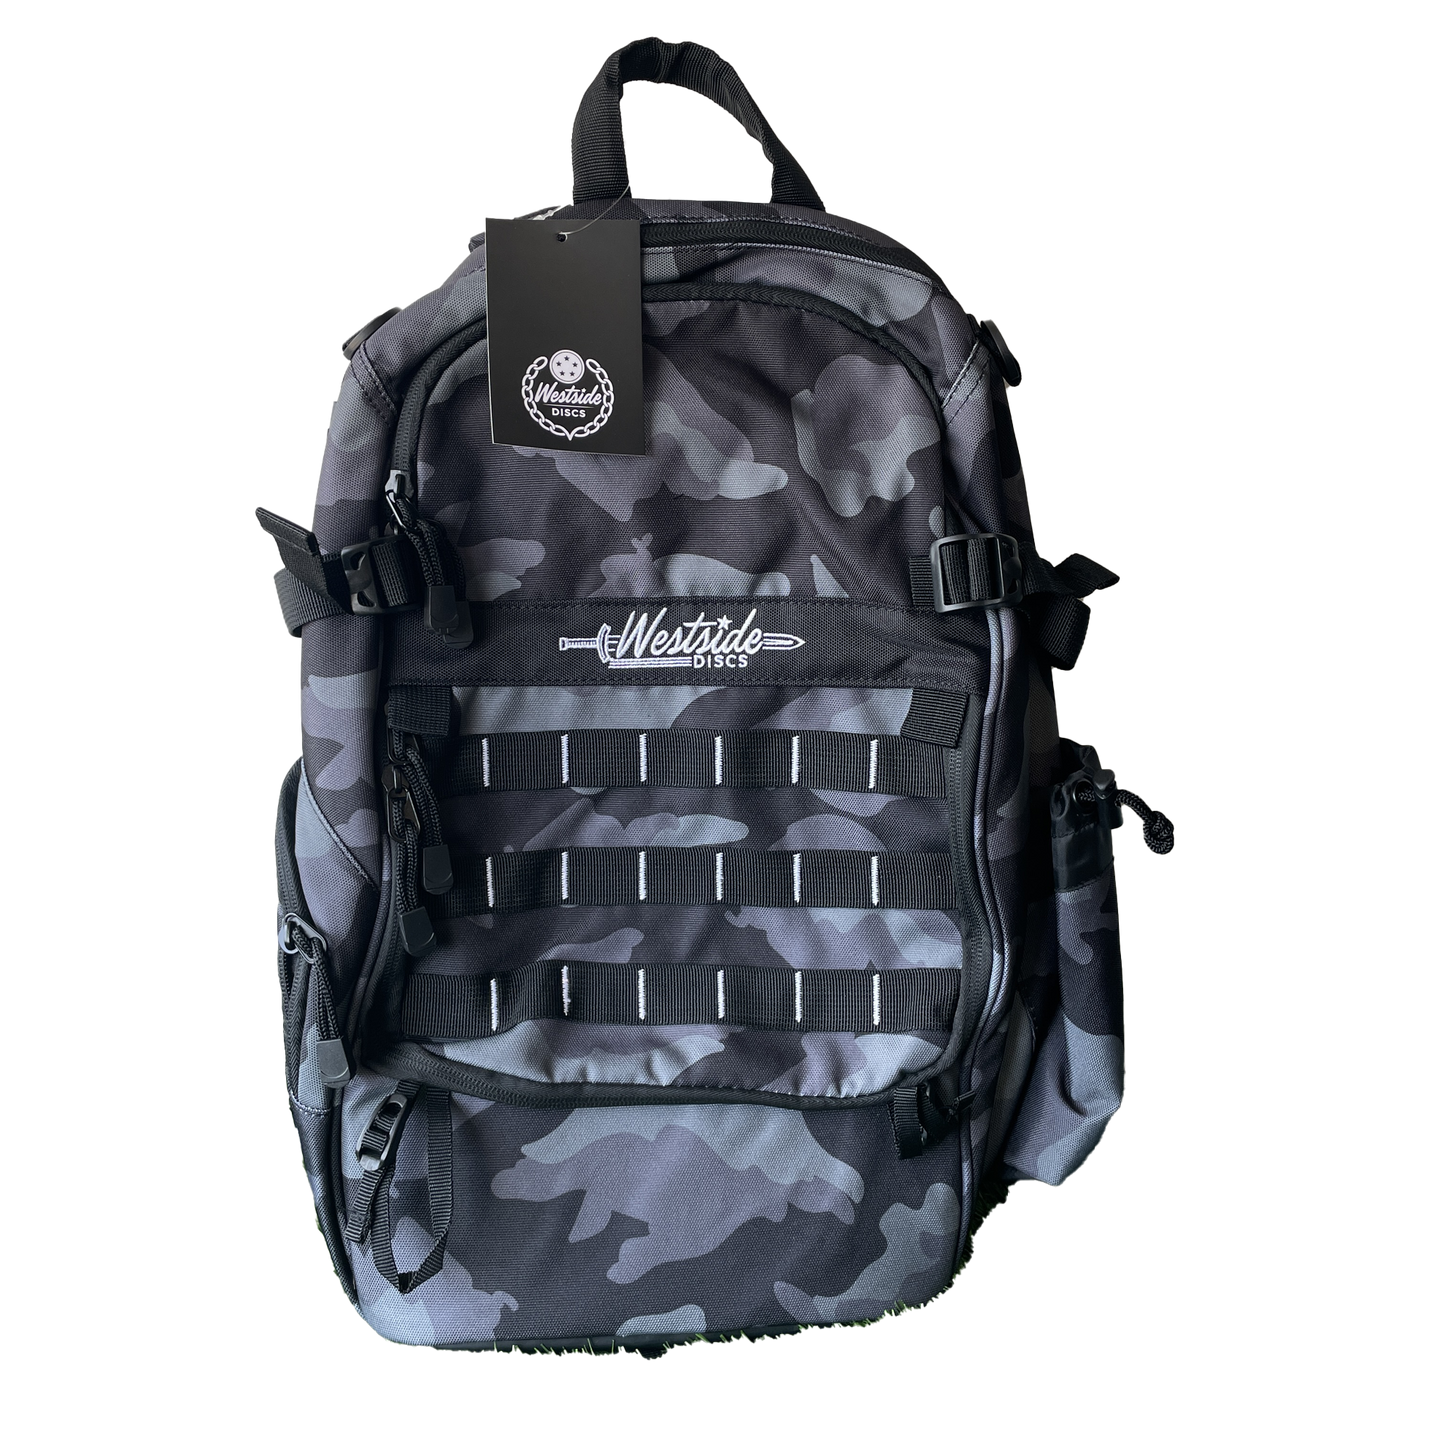 Westside Discs Refuge Pack Disc Golf Bag | Durable Frisbee Golf Backpack | Holds 18+ Discs | Great for All Skill Levels | Lightweight Bag with Tons of Storage